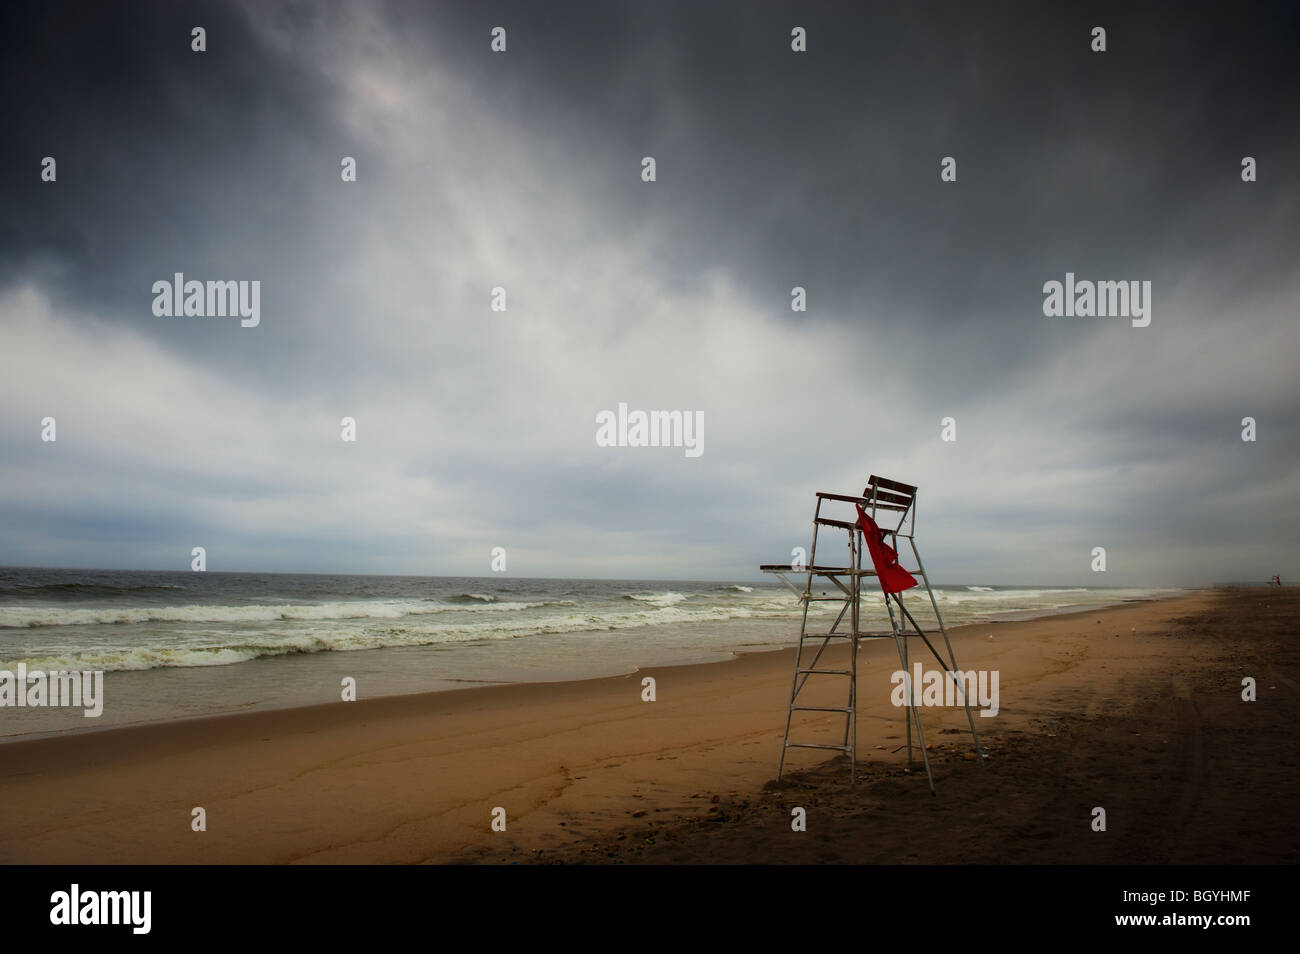 Lifeguard chair on beach Banque D'Images